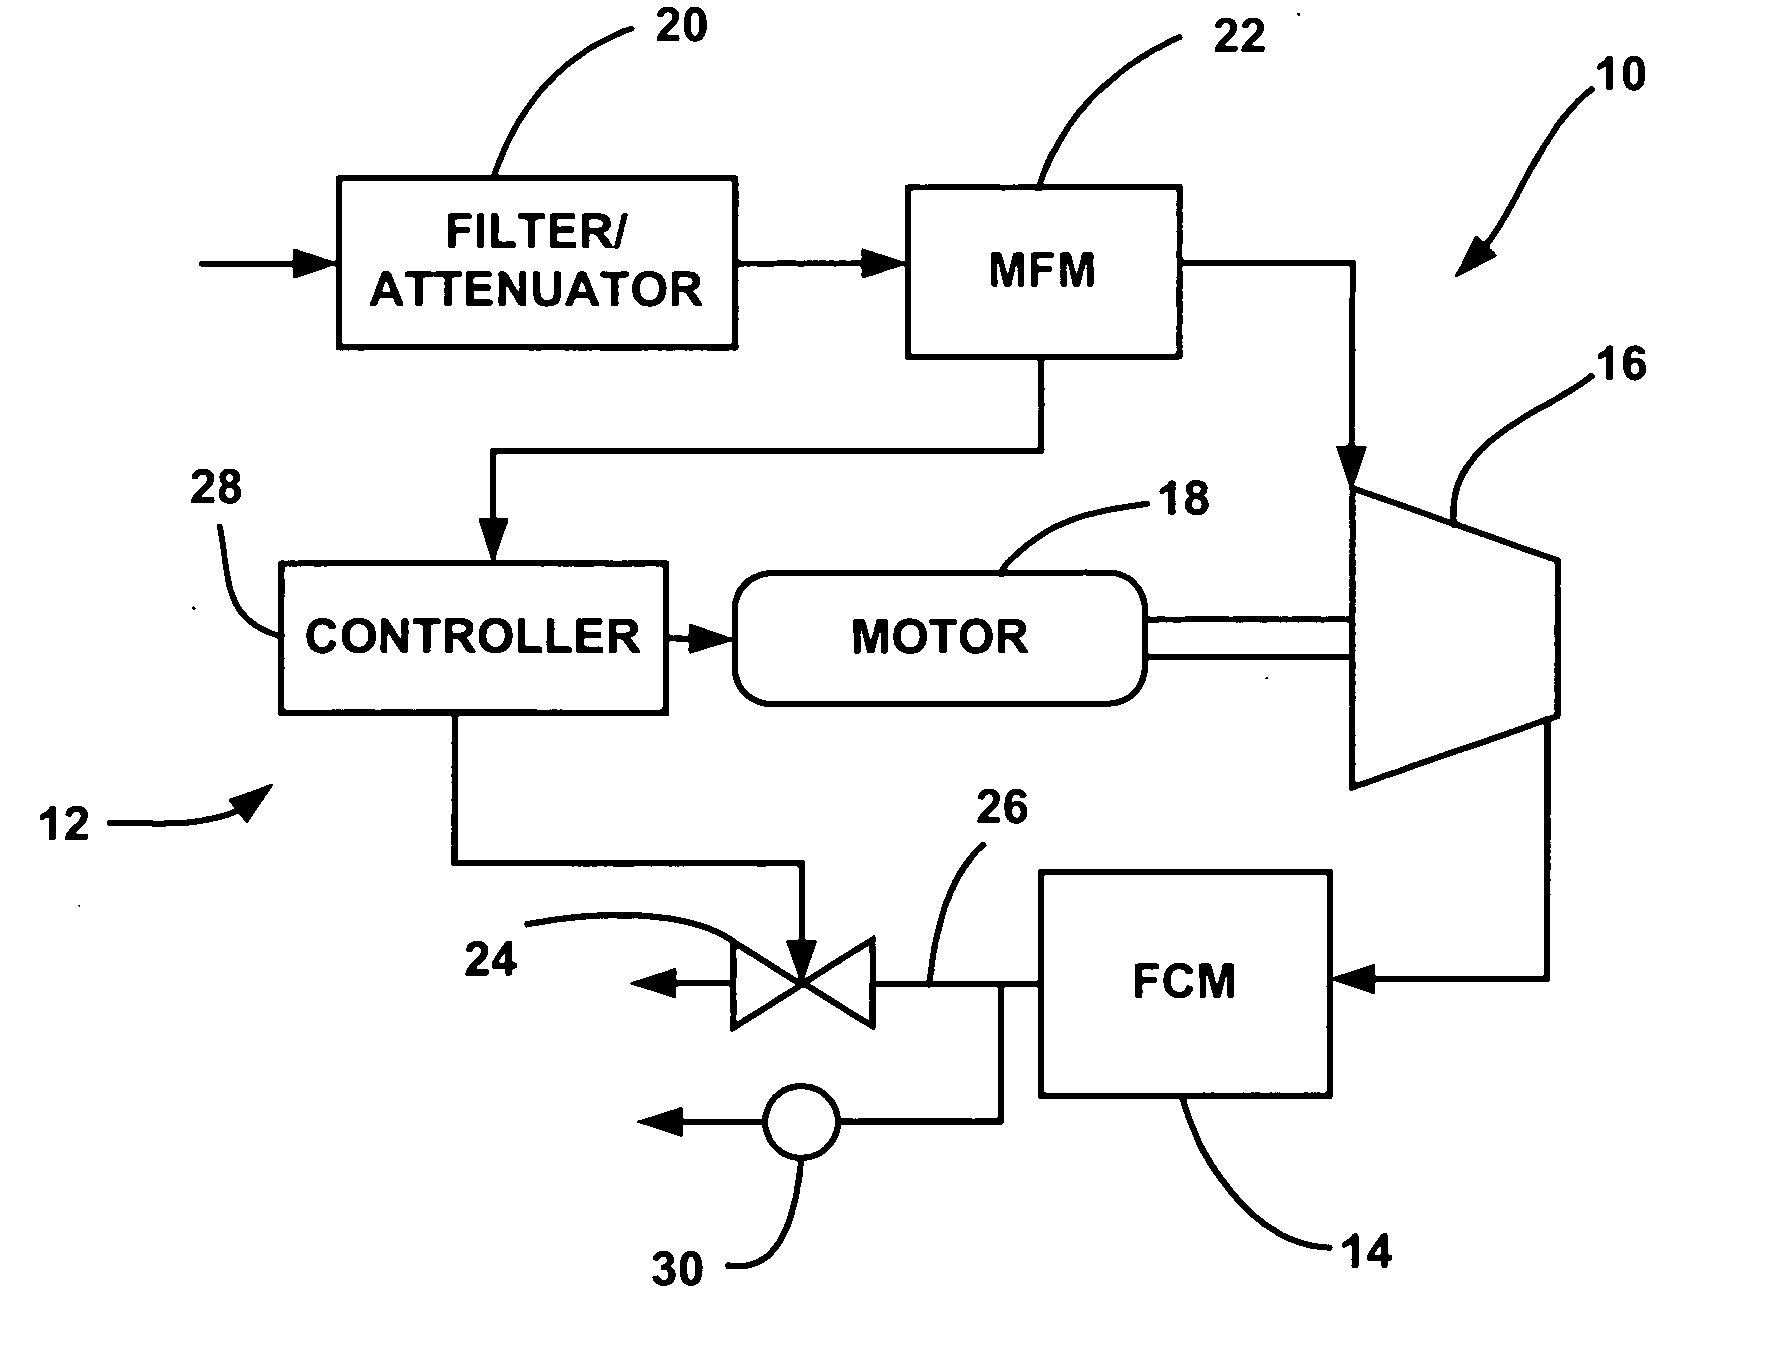 Virtual compressor operational parameter measurement and surge detection in a fuel cell system